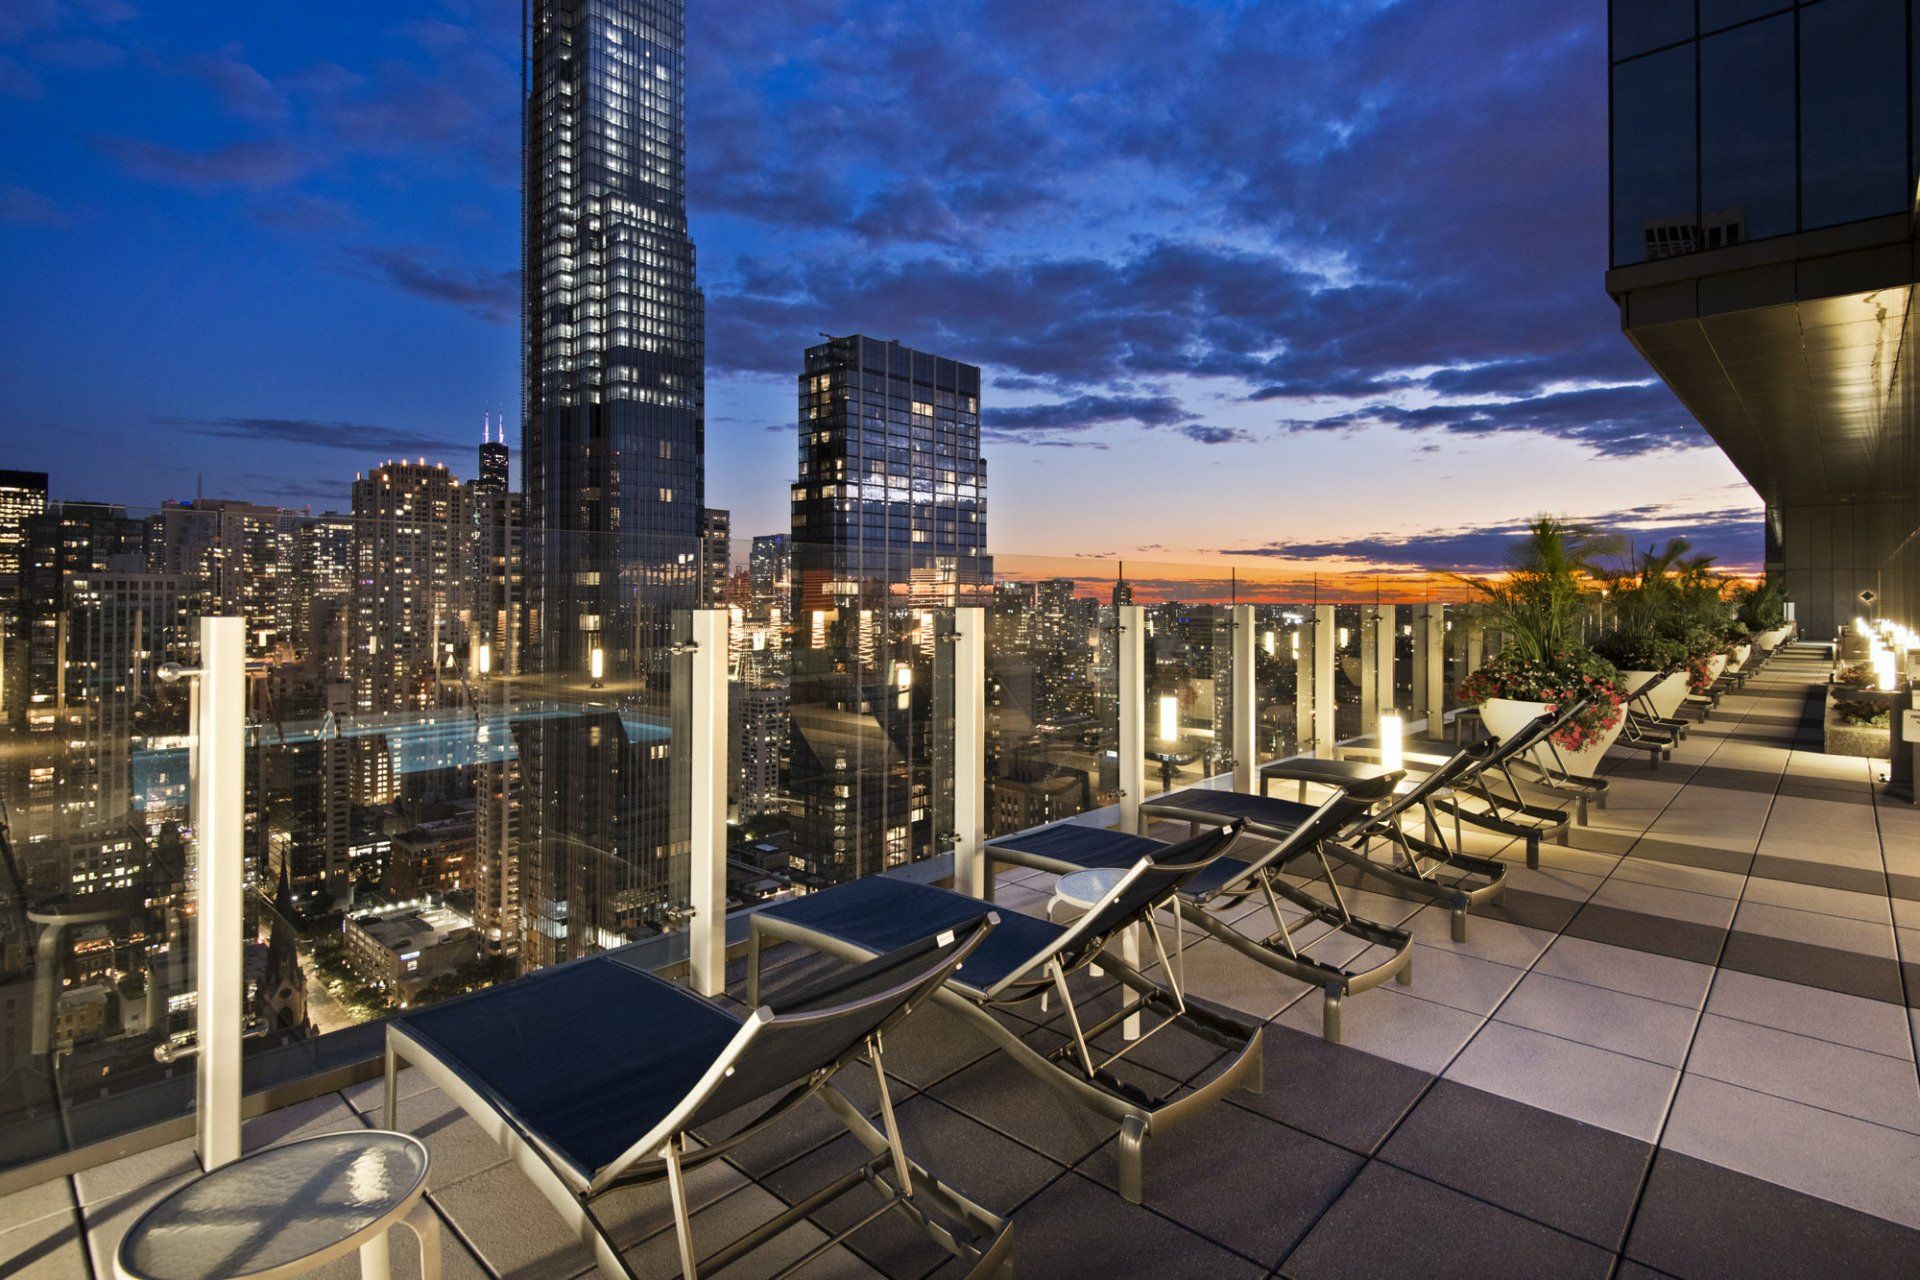 A rooftop deck with a view of the city at night at State & Chestnut.